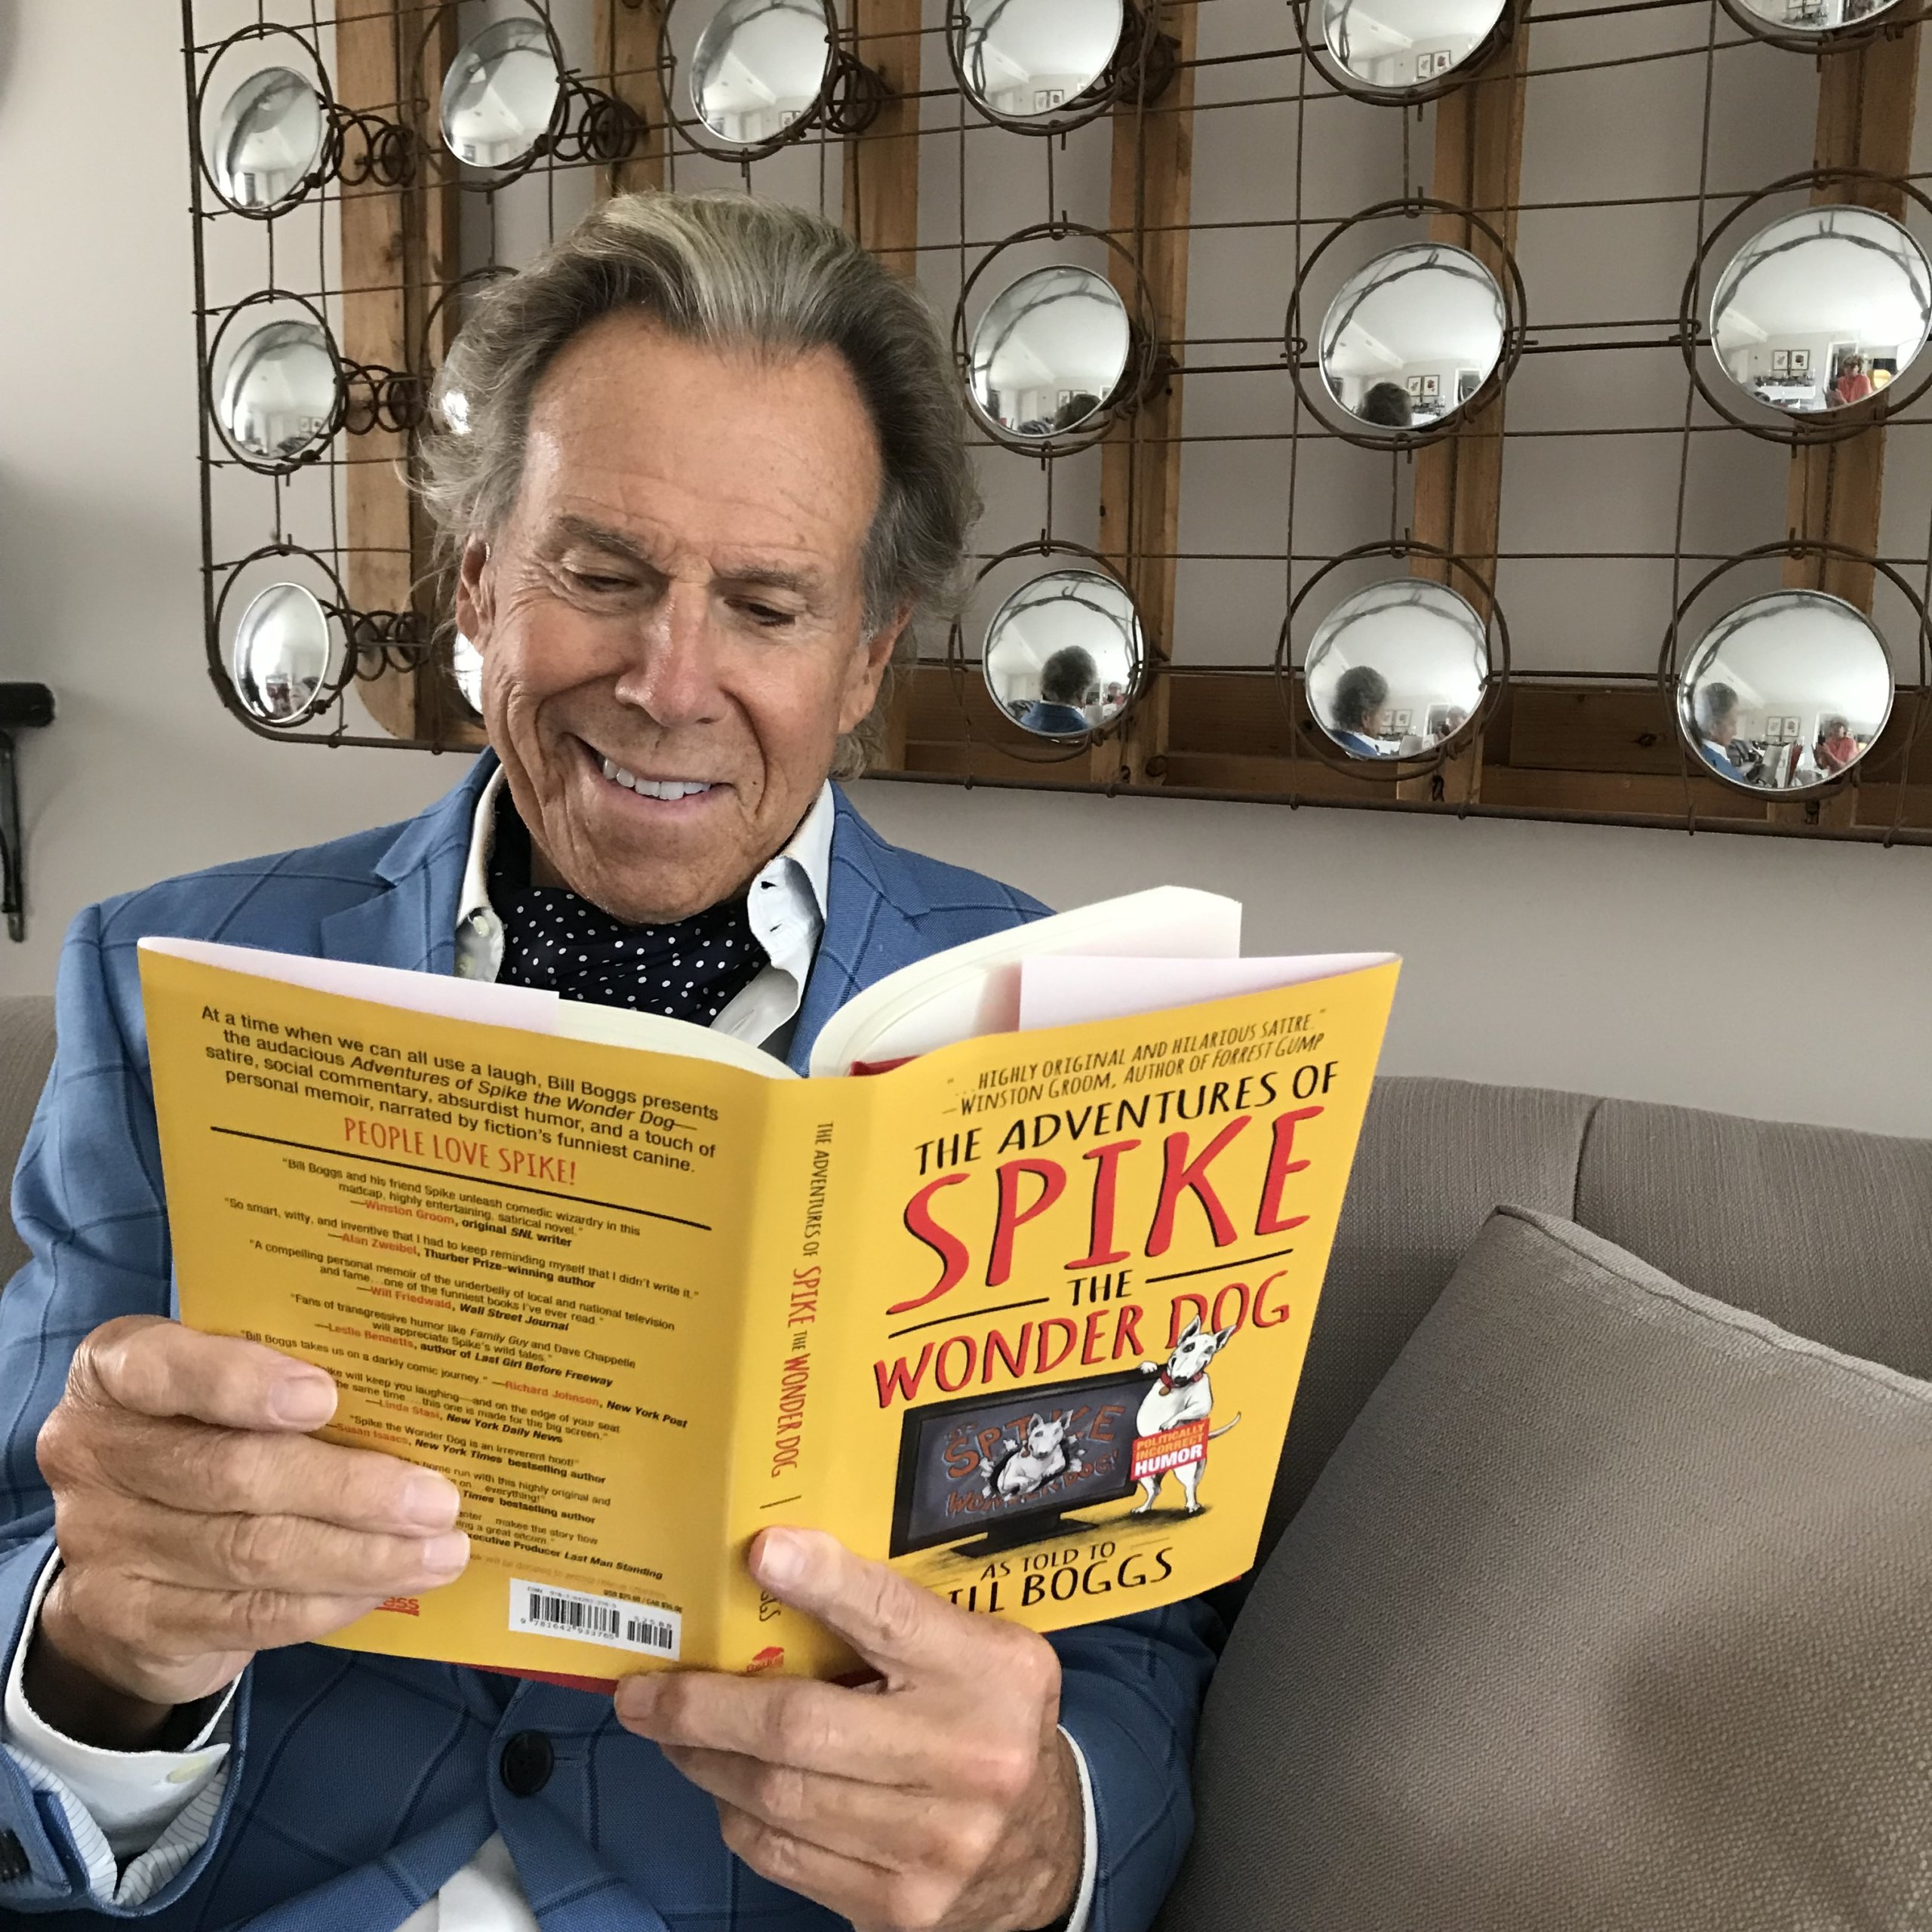 Bill Boggs with his book "The Adventures of Spike the Wonder Dog" Jane Rothchild